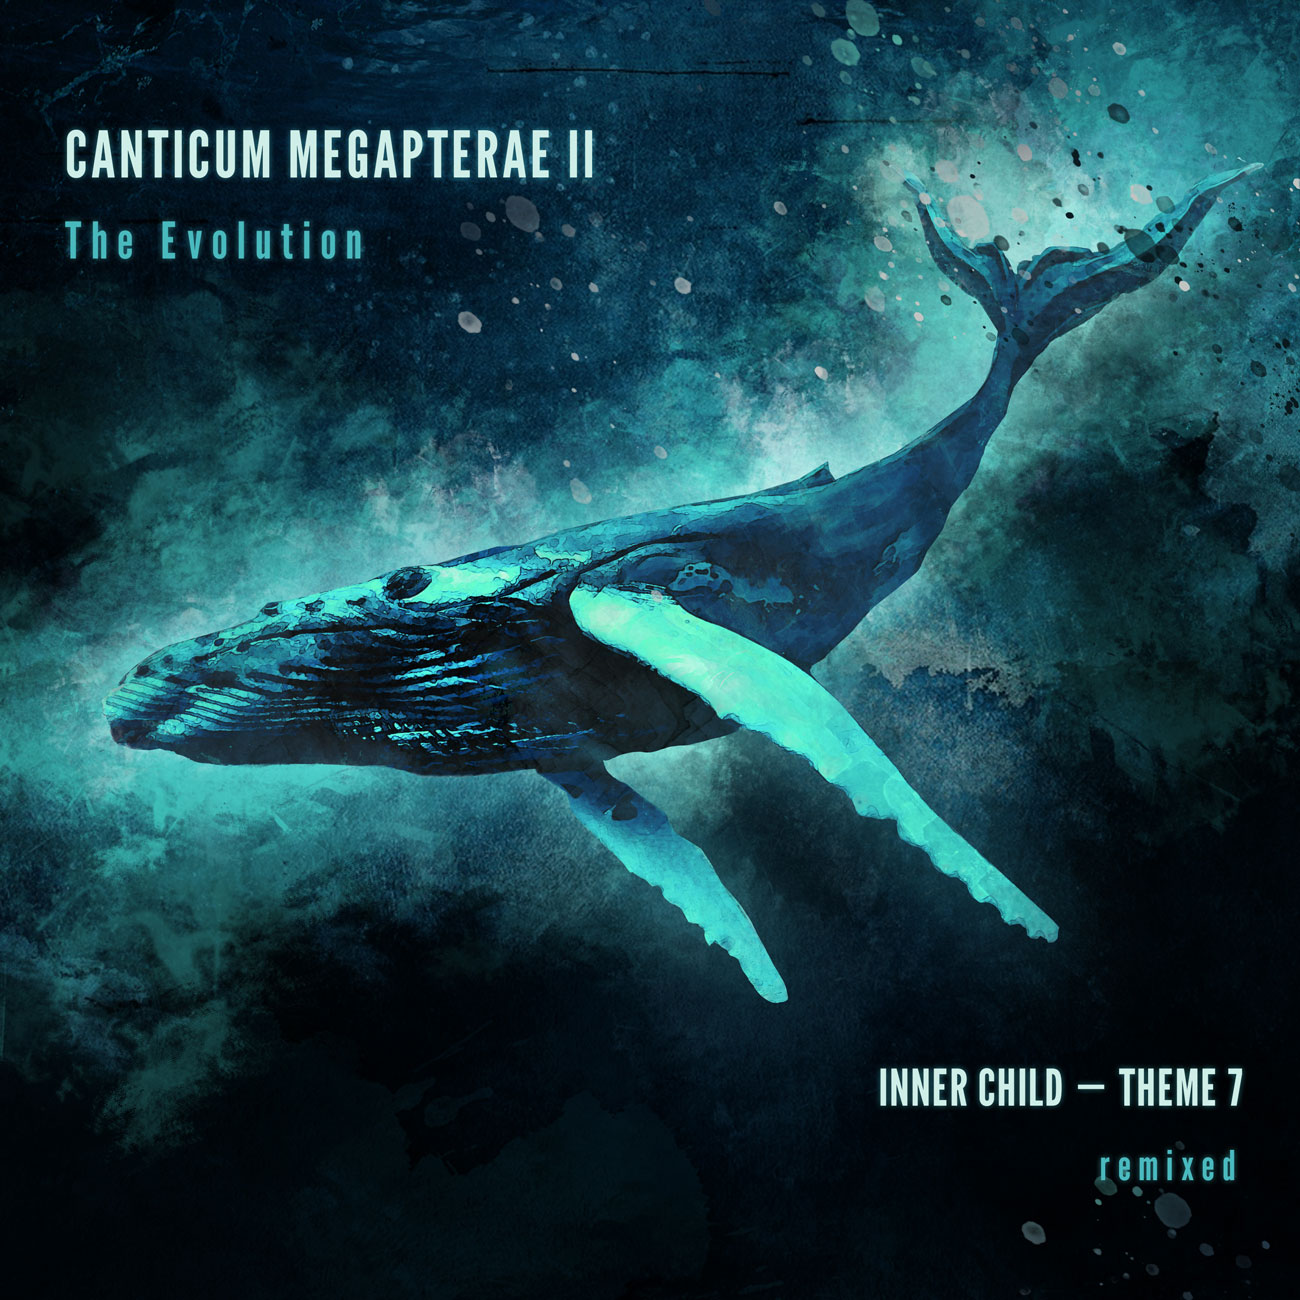 Song cover graphic of Sara Niksic's second album "Canticum Megapterae II". The cover is done in a water color style with a dark blue background that fades to a light blue towards the center around a light blue/aquamarine humpback whale gliding through the water.